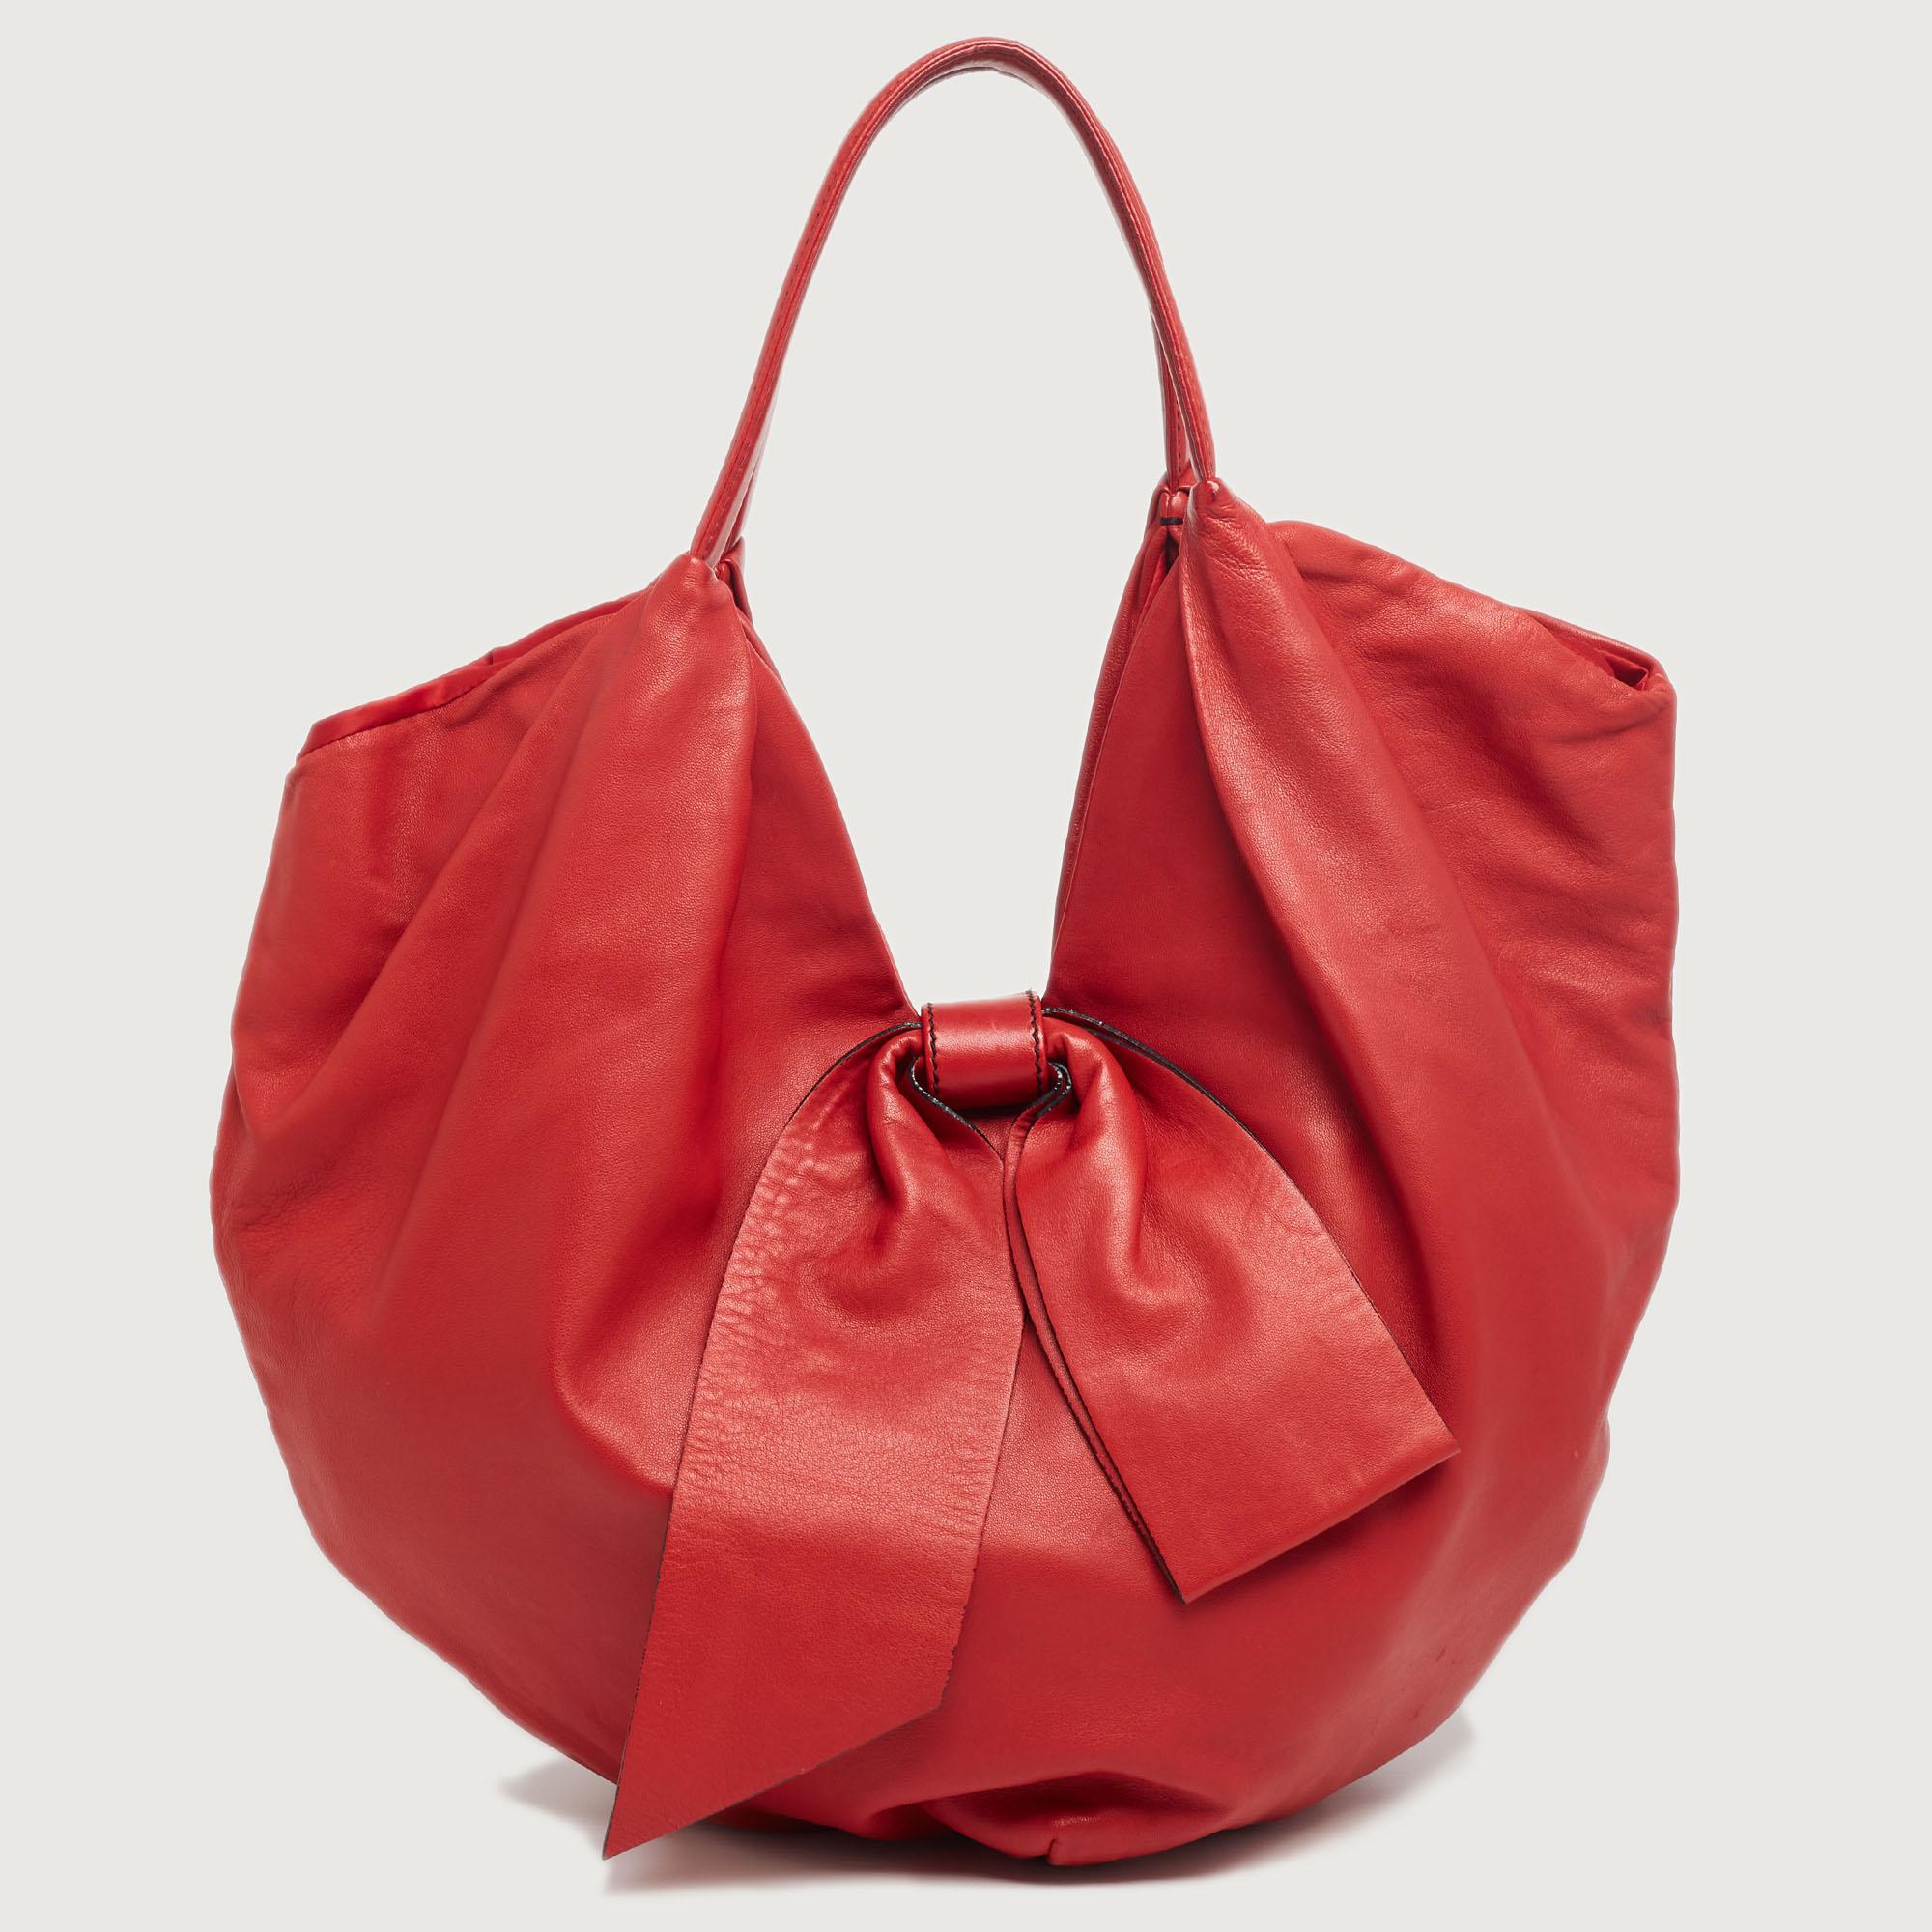 A large bow on the front is the highlight of this Valentino 360 Bow hobo. It is crafted using red leather and equipped with two handles and a spacious satin interior. This eye-catching bag will add a chic finish to your favorite looks.

Includes: